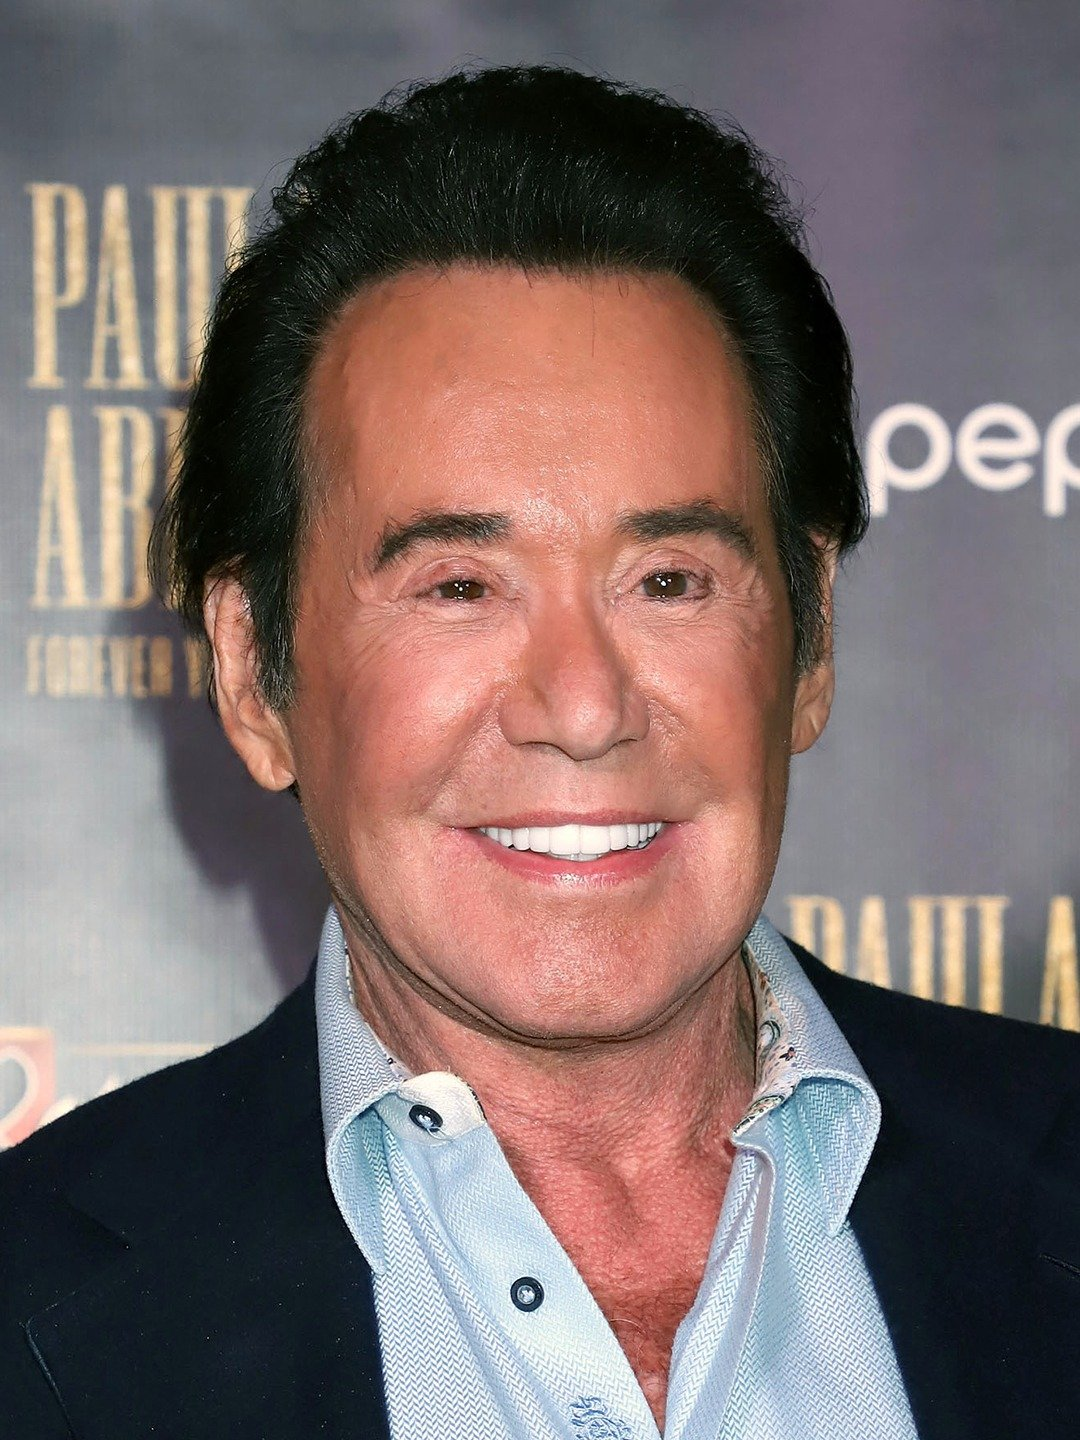 Wayne Newton wearing his trademark smile for a picture